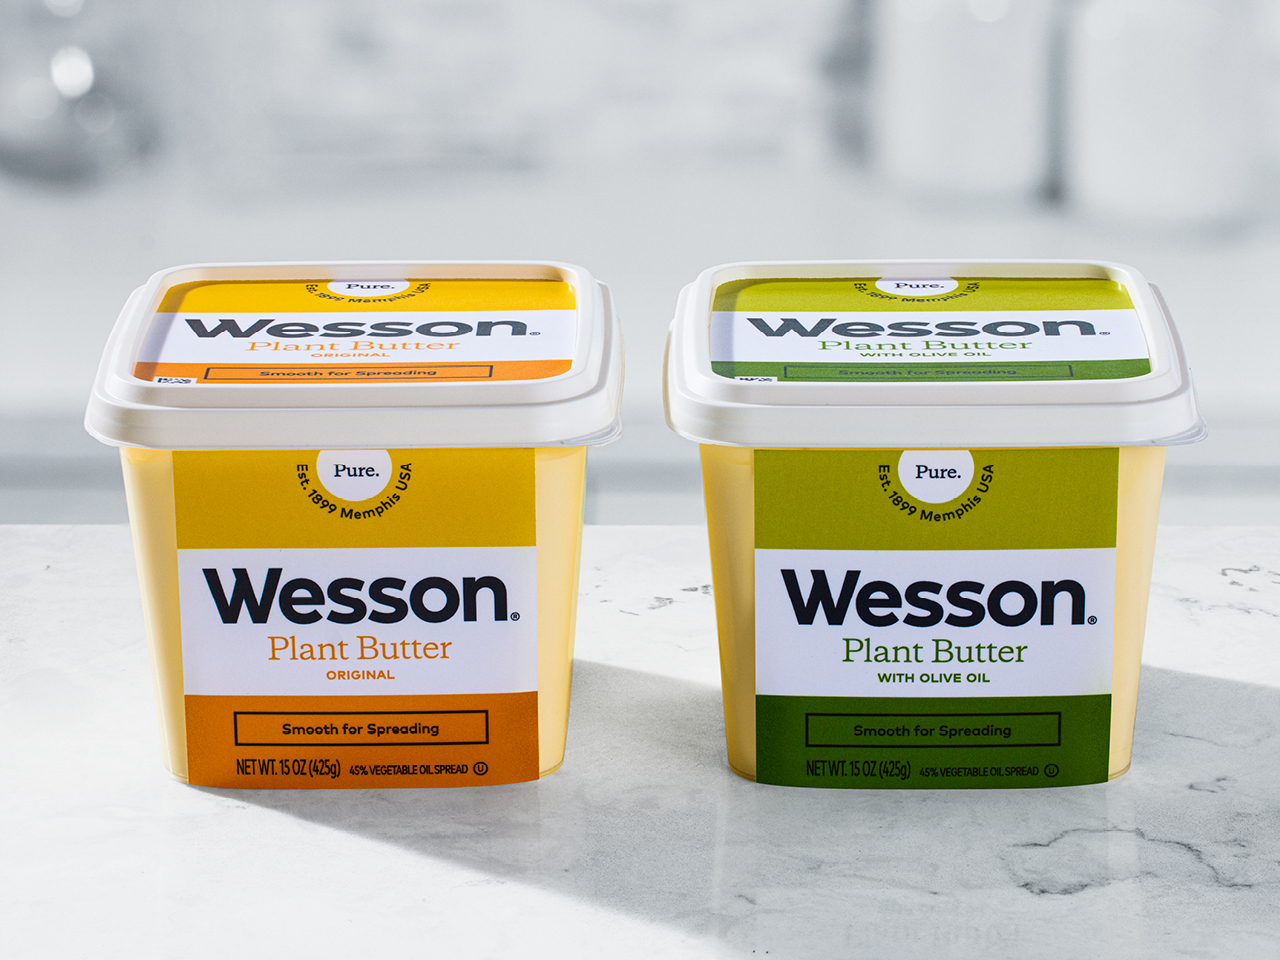 Featured image for “Building on Brand Relaunch Momentum, Wesson Introduces New Plant Butters”